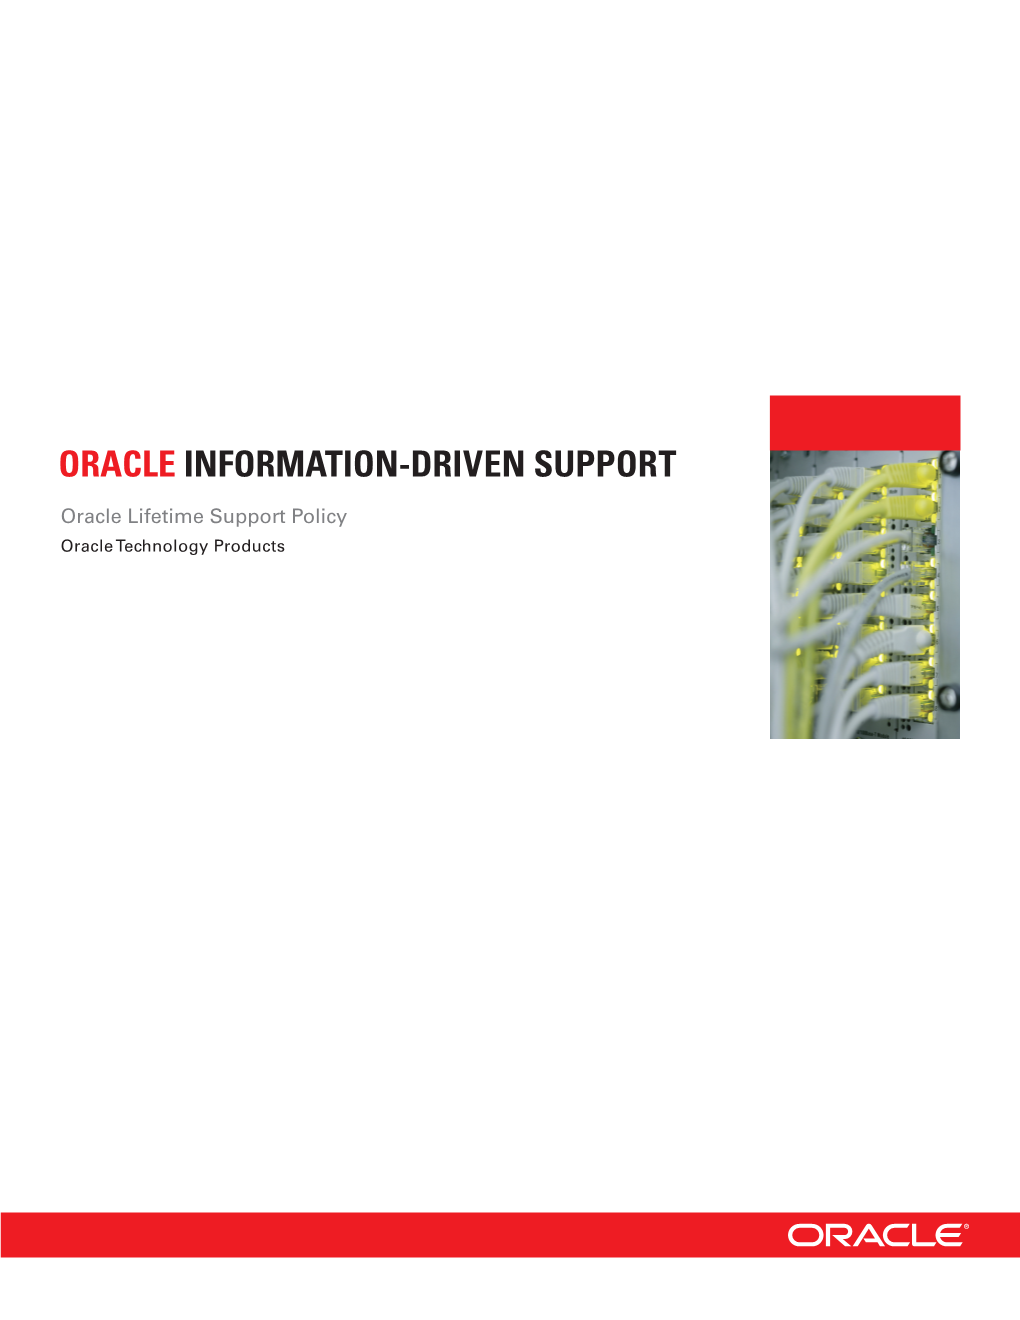 Oracle Lifetime Support Policy for Technology Products Guide